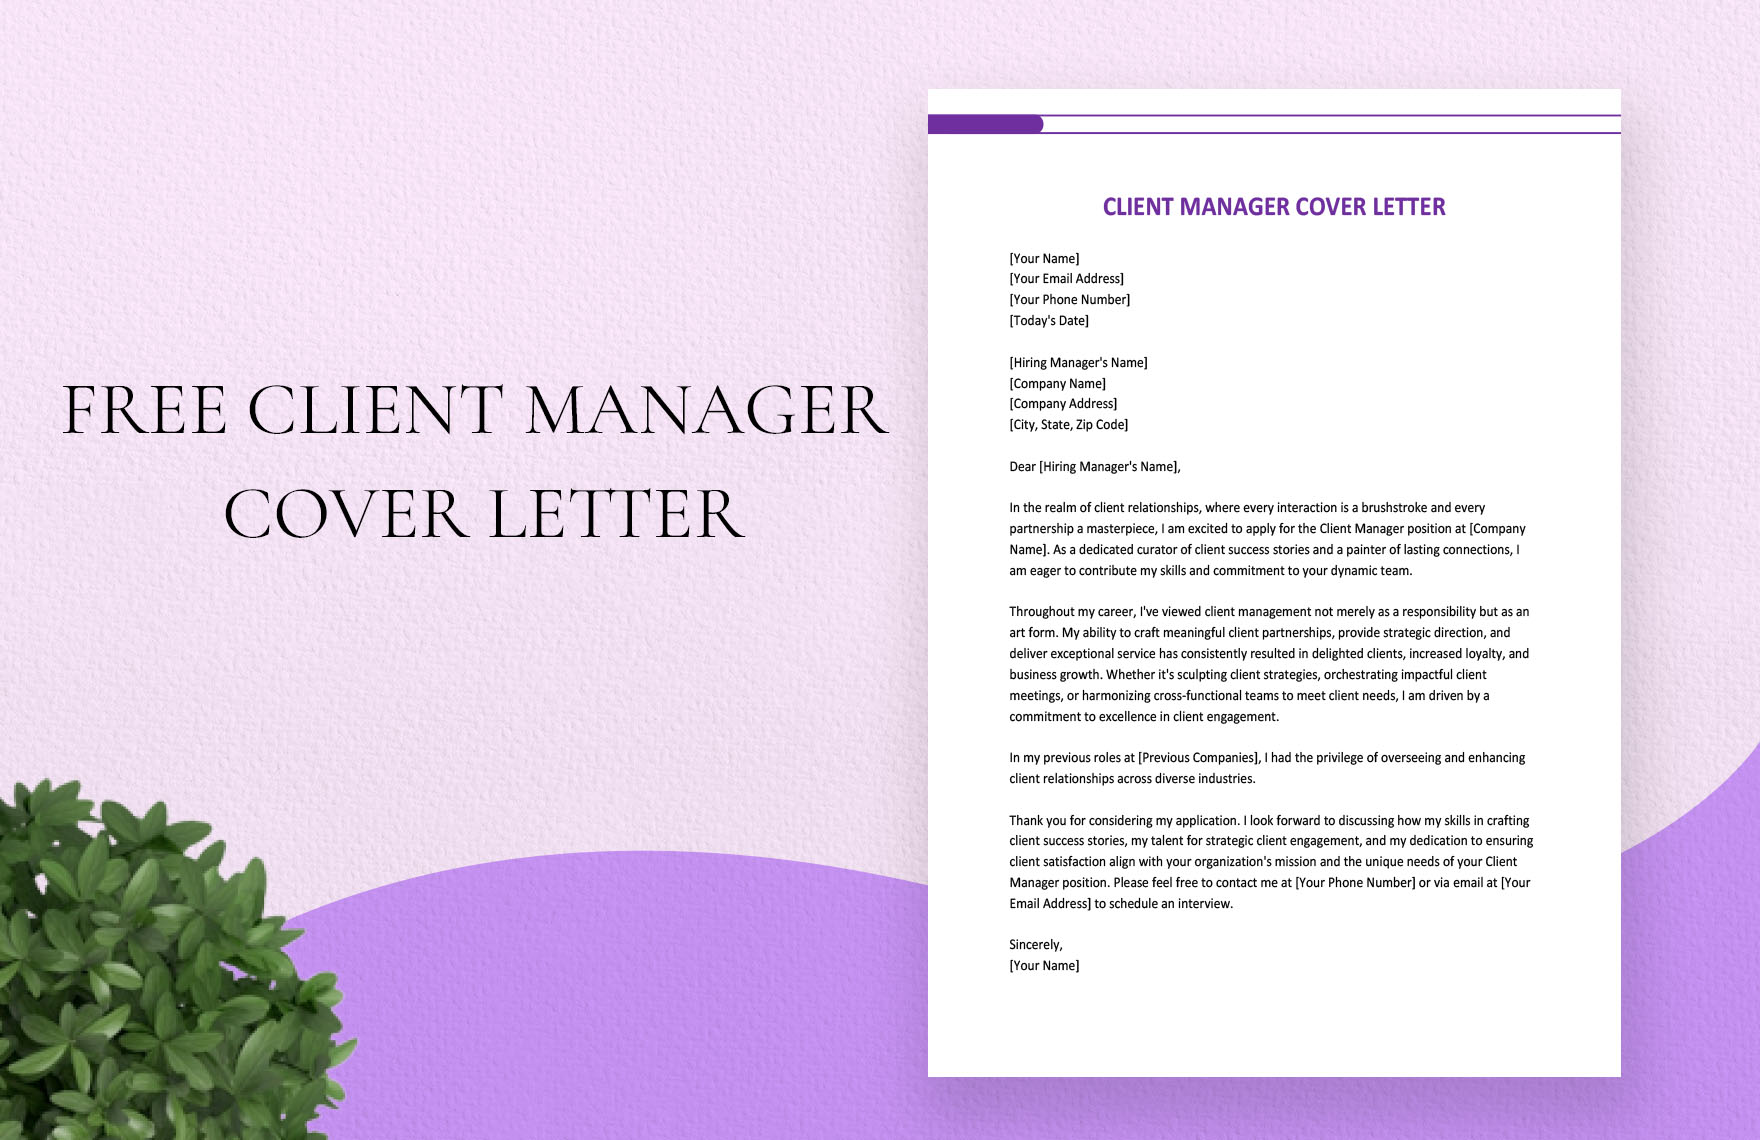 Client Manager Cover Letter